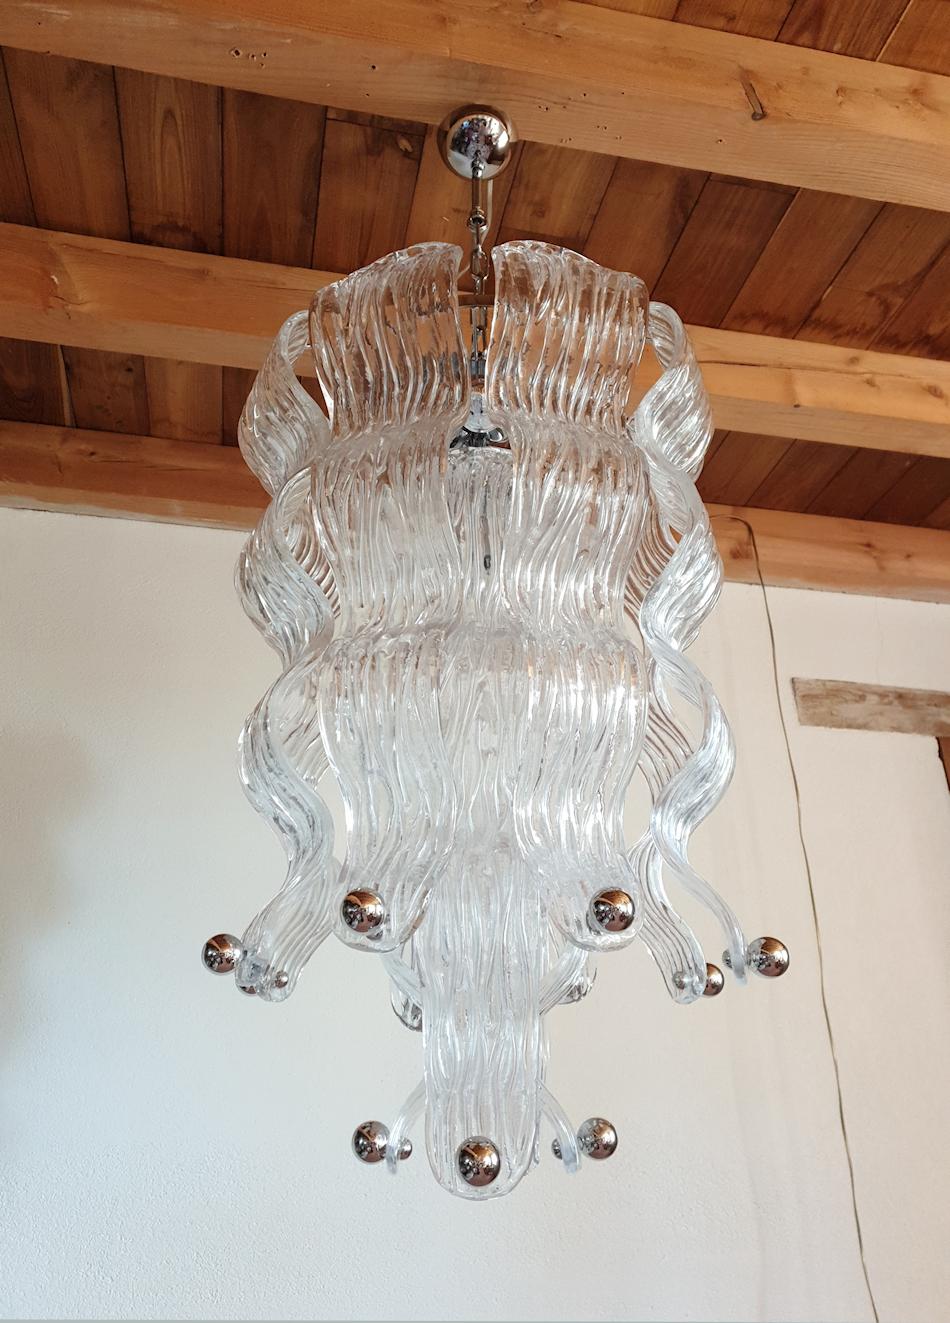 Tall vintage modern style Murano glass chandelier, with chrome fittings, attributed to Mazzega, Italy 1970s.
Two chandeliers available, identical; sold and priced individually.
The Mid-Century Modern pendant light is made of large clear textured